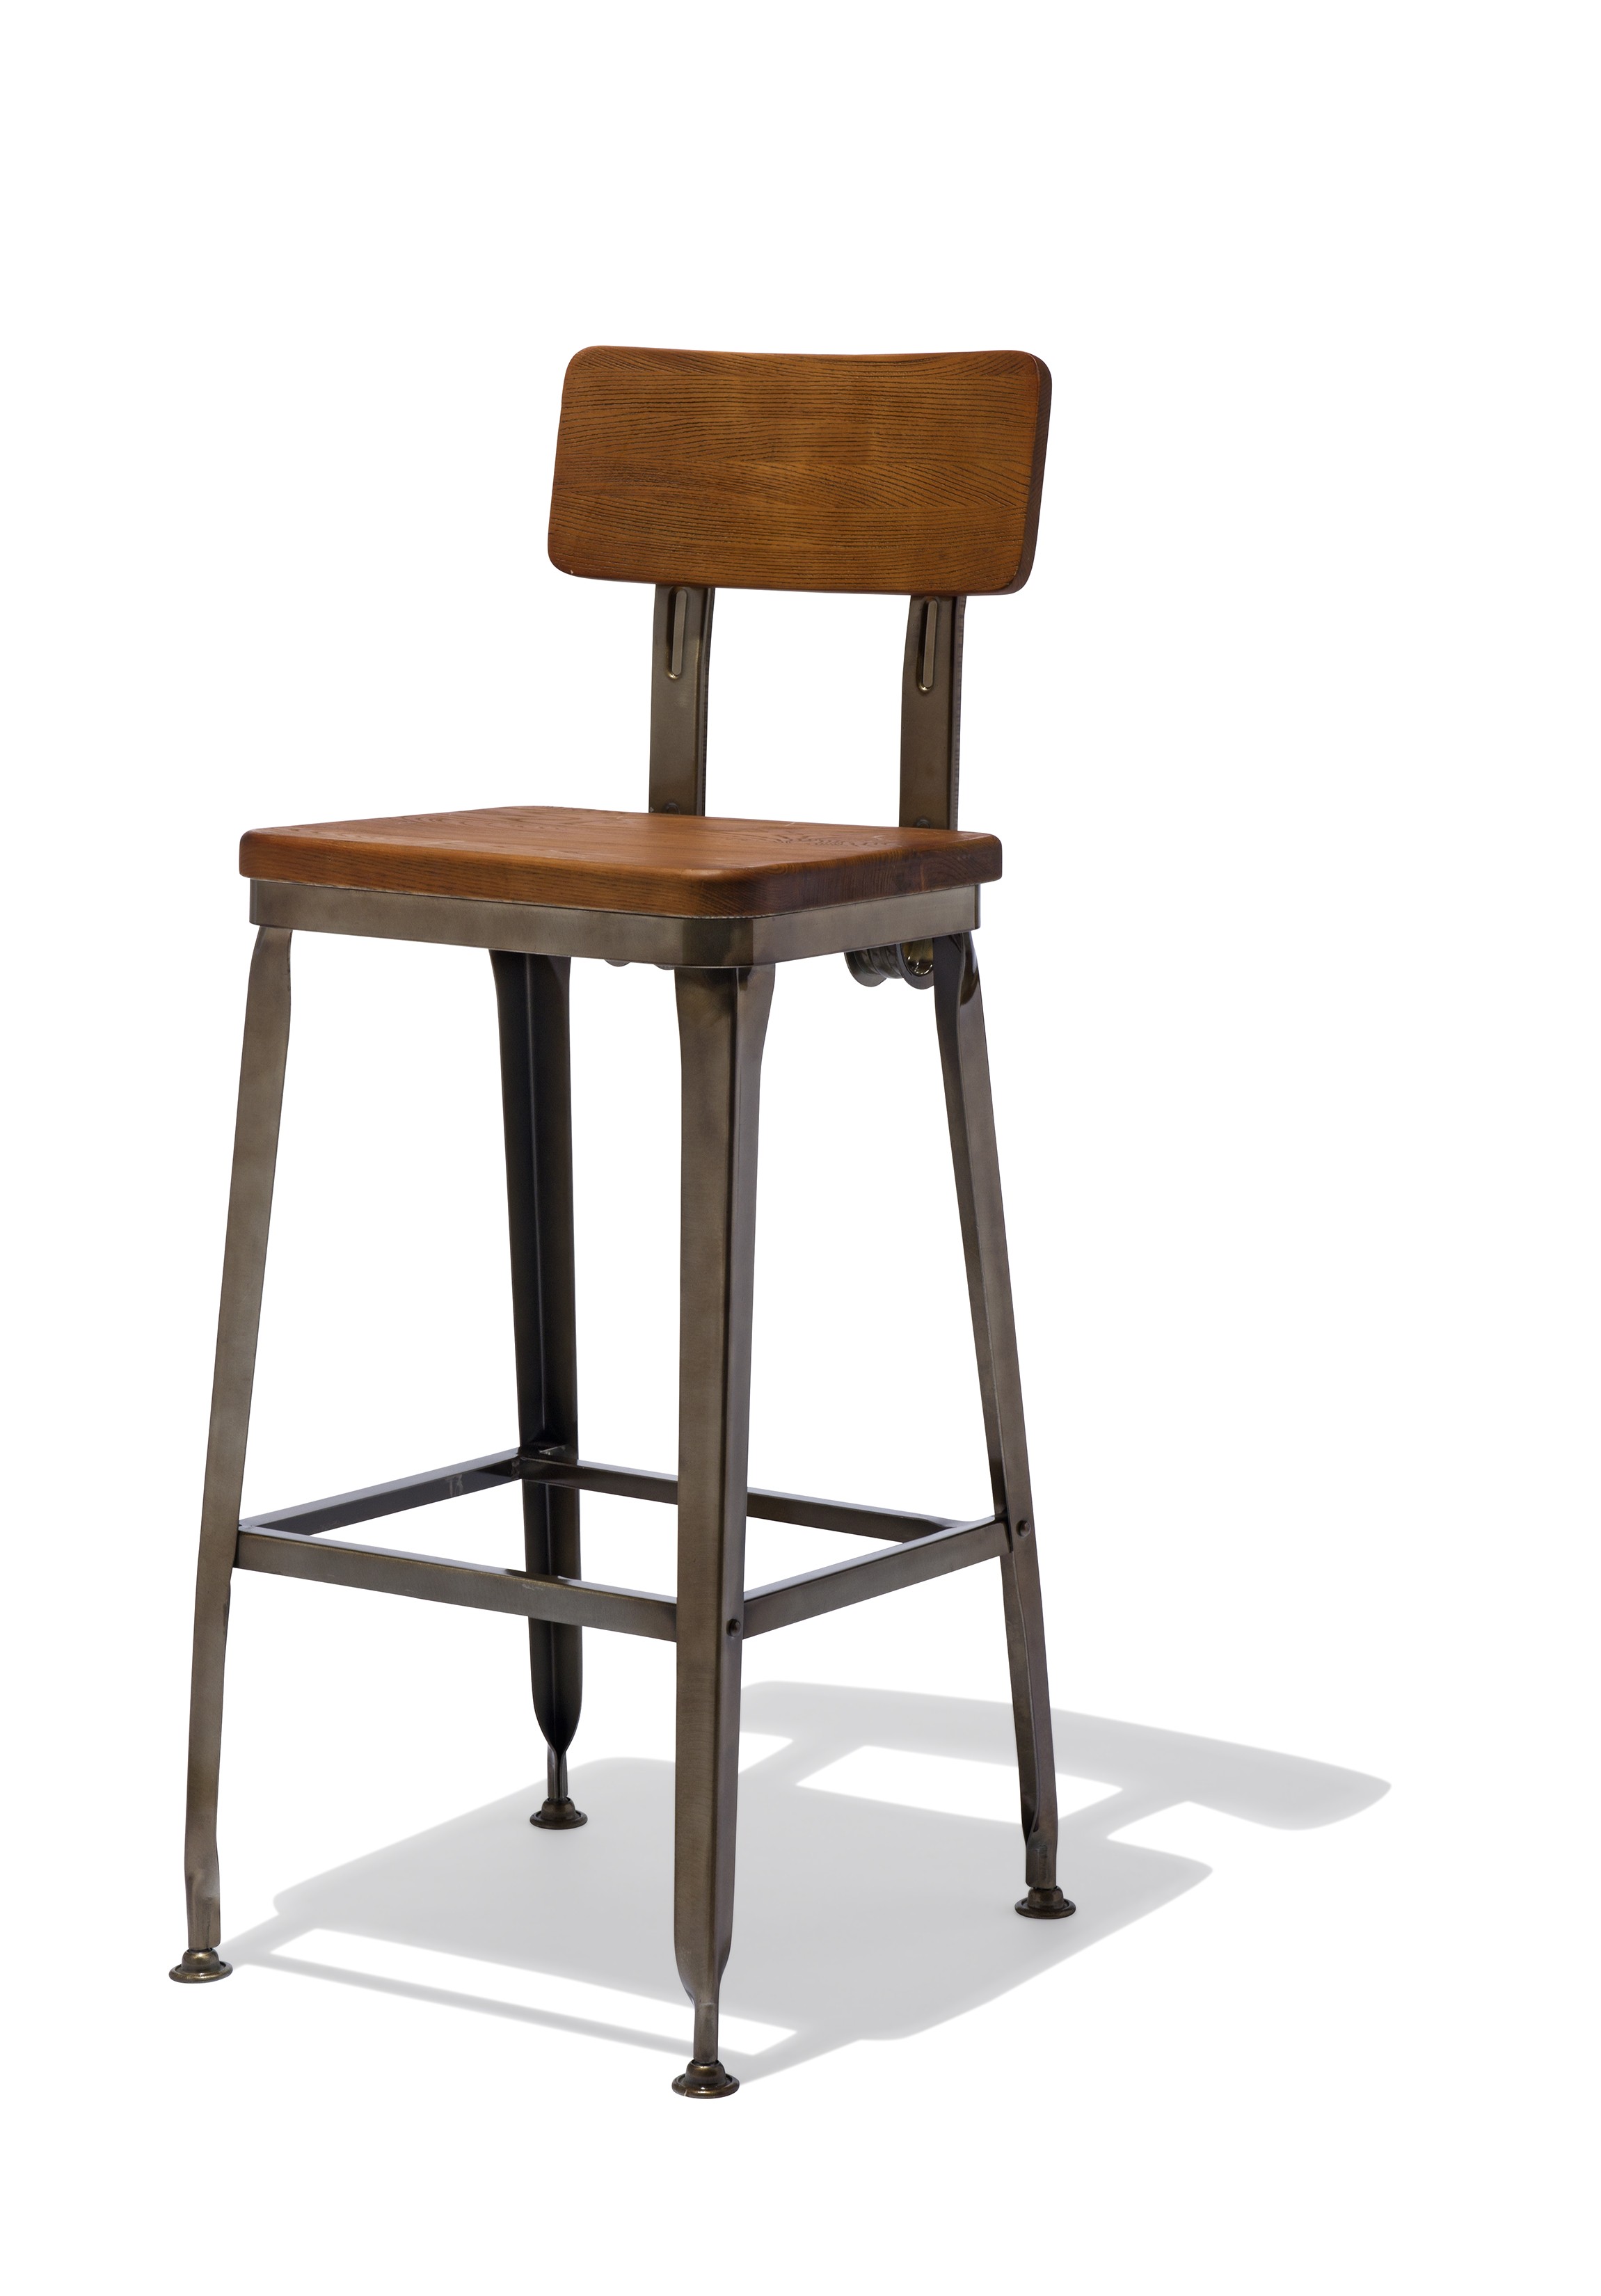 octane bar stool with a wood seat